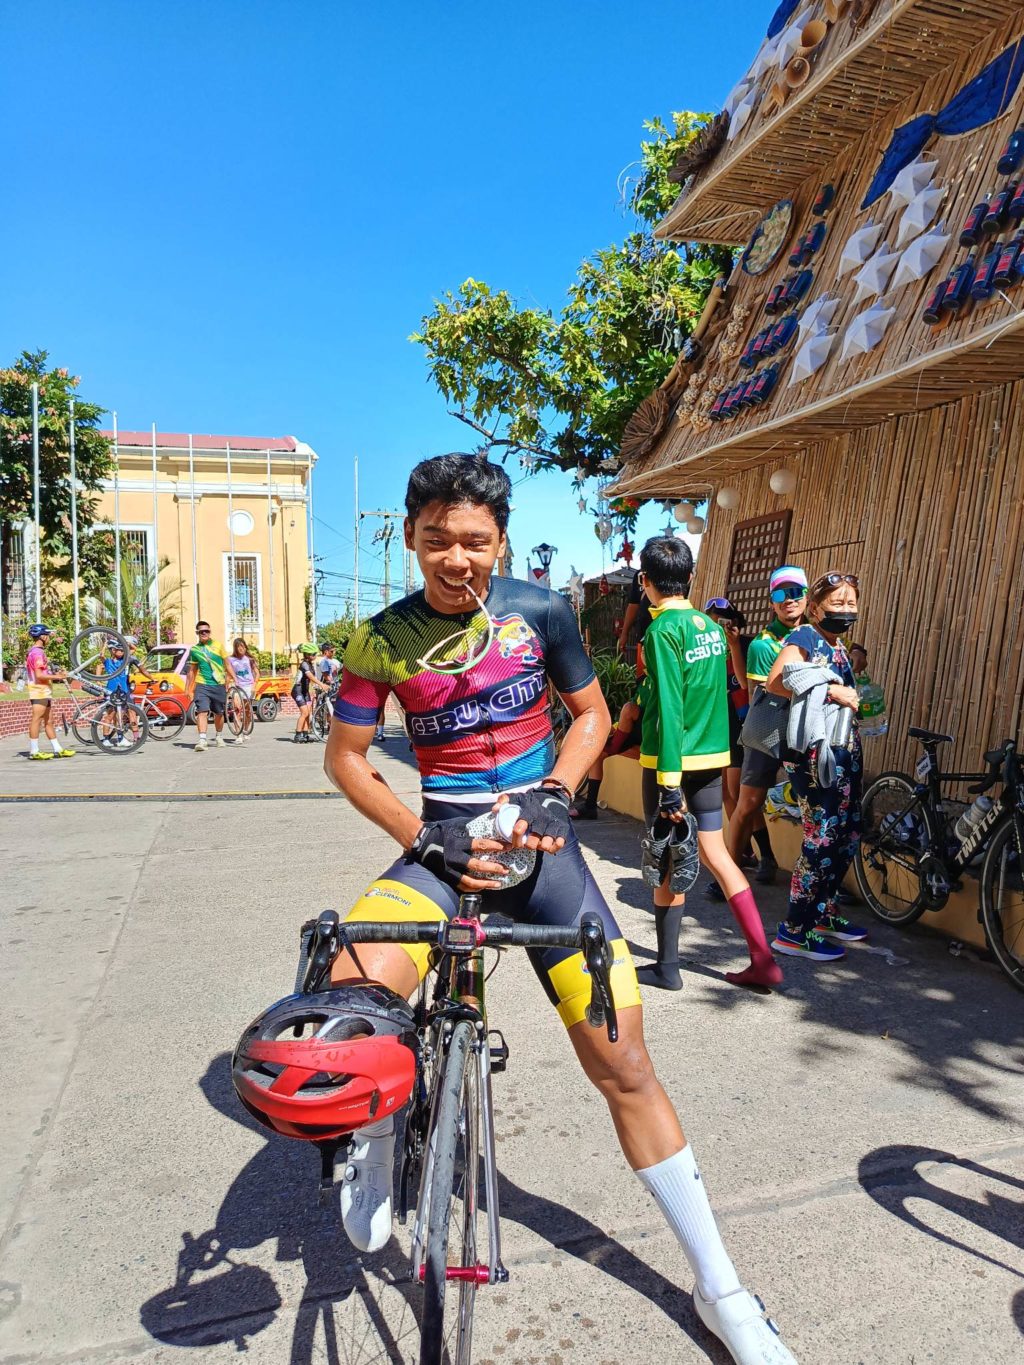 Chris Andreu Ferrer of Cebu City Niños wins the criterium race, a the cycling event, in the ongoing Batang Pinoy National Championships in Vigan, Ilocos Sur. | Contributed Photo